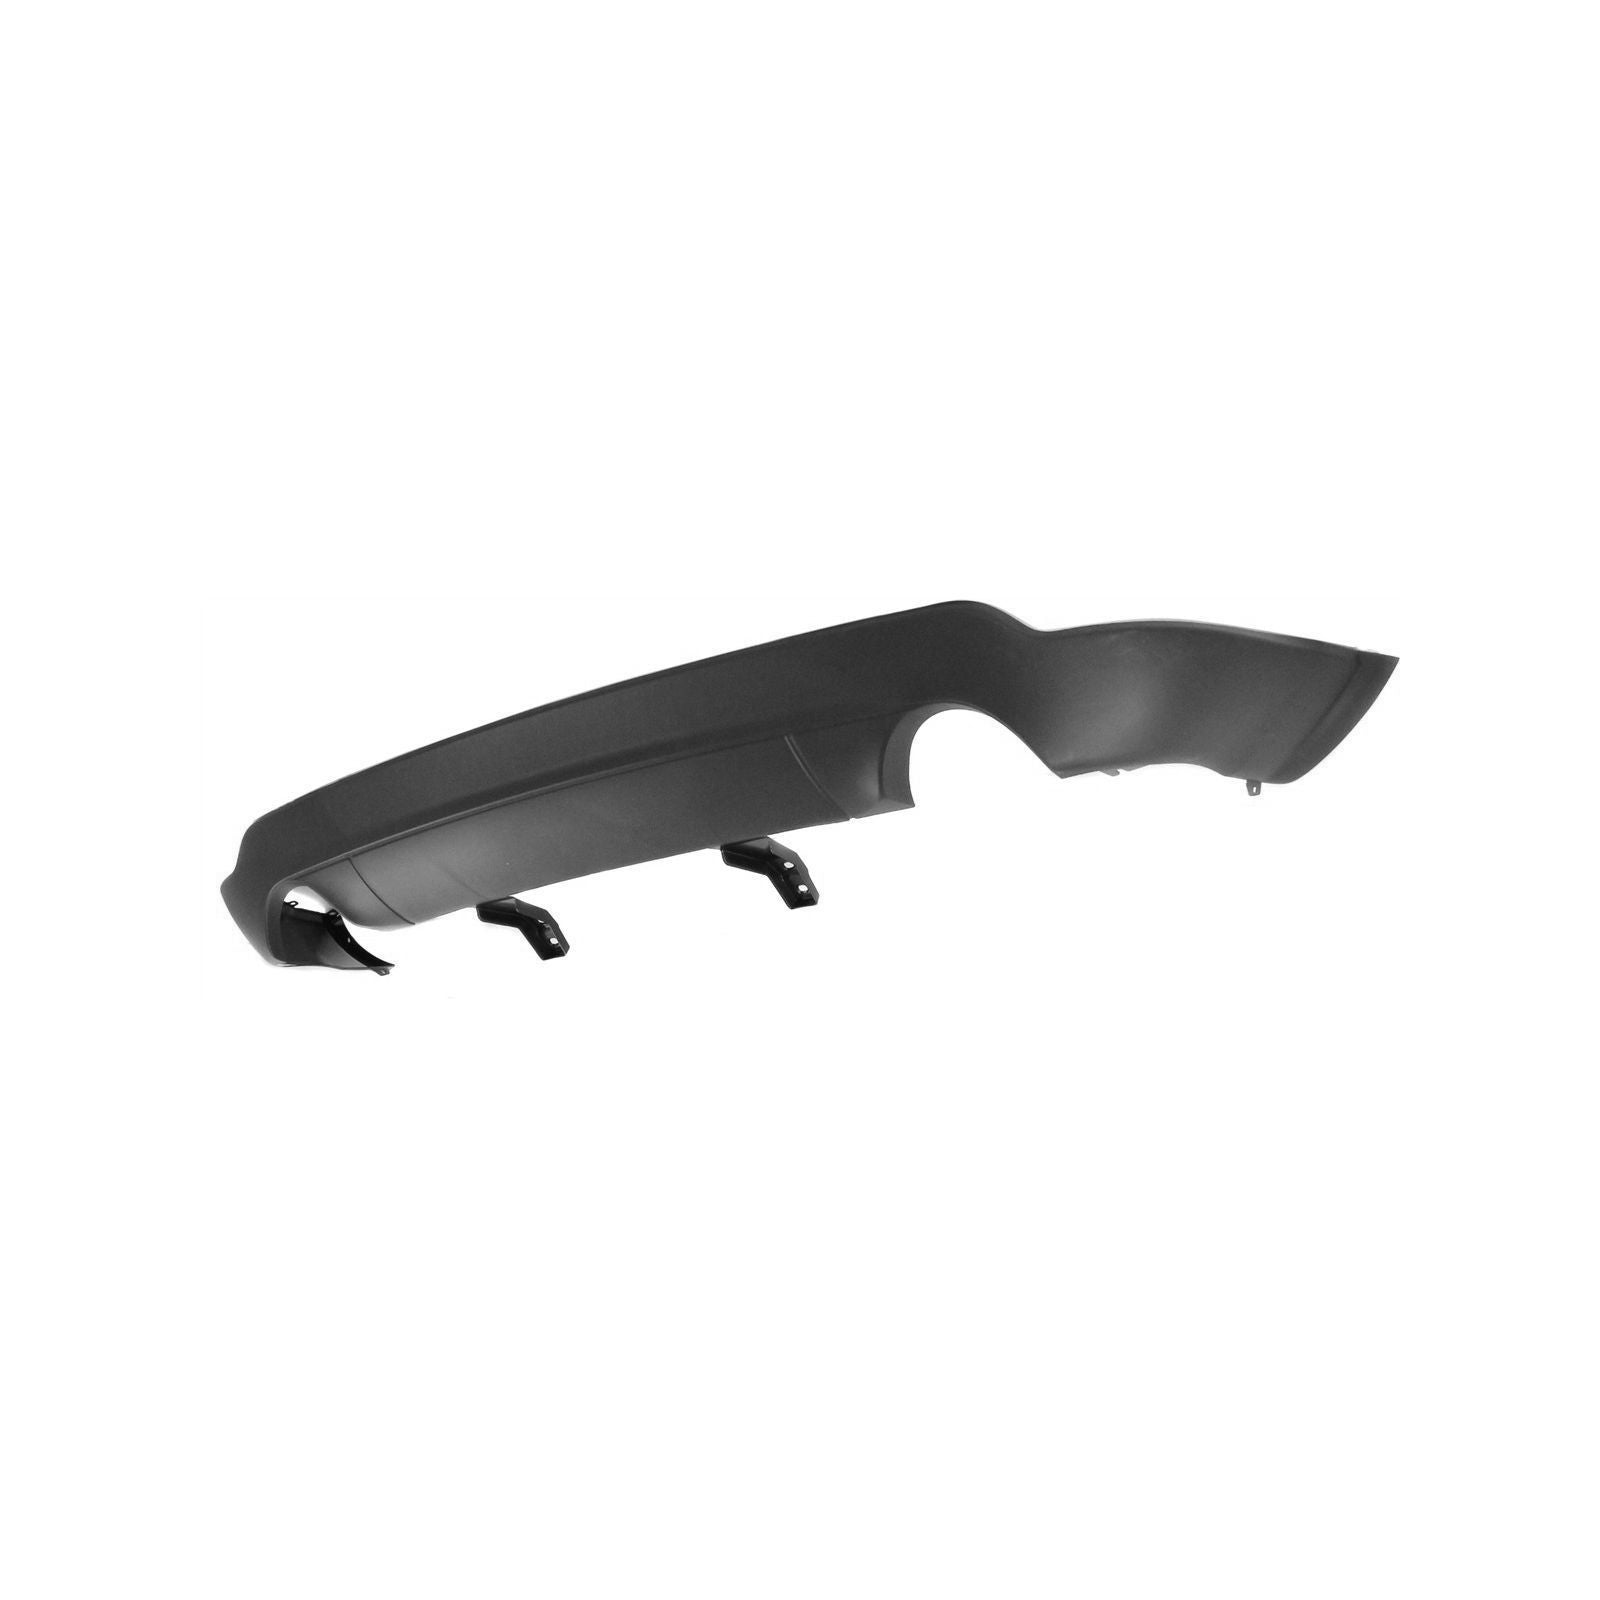 Jeep Grand Cherokee 2011 - 2021 Rear Textured Lower Bumper Cover 11 - 21 CH1195103 Bumper-King